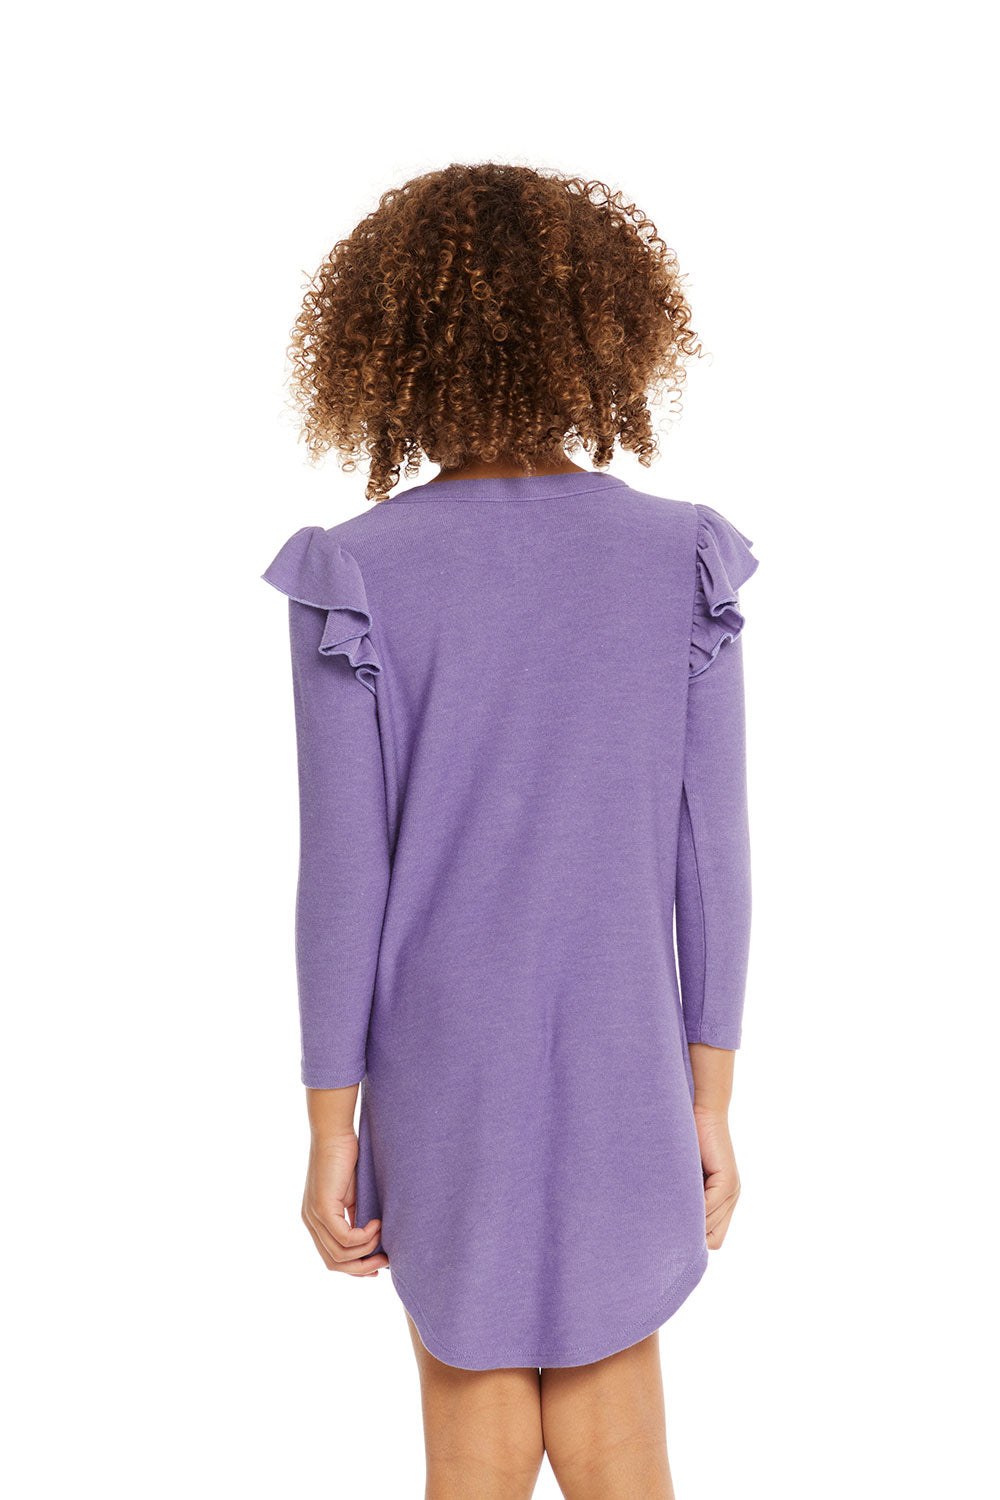 Long Sleeve Veronica Purple Dress with Shoulder Ruffle GIRLS chaserbrand